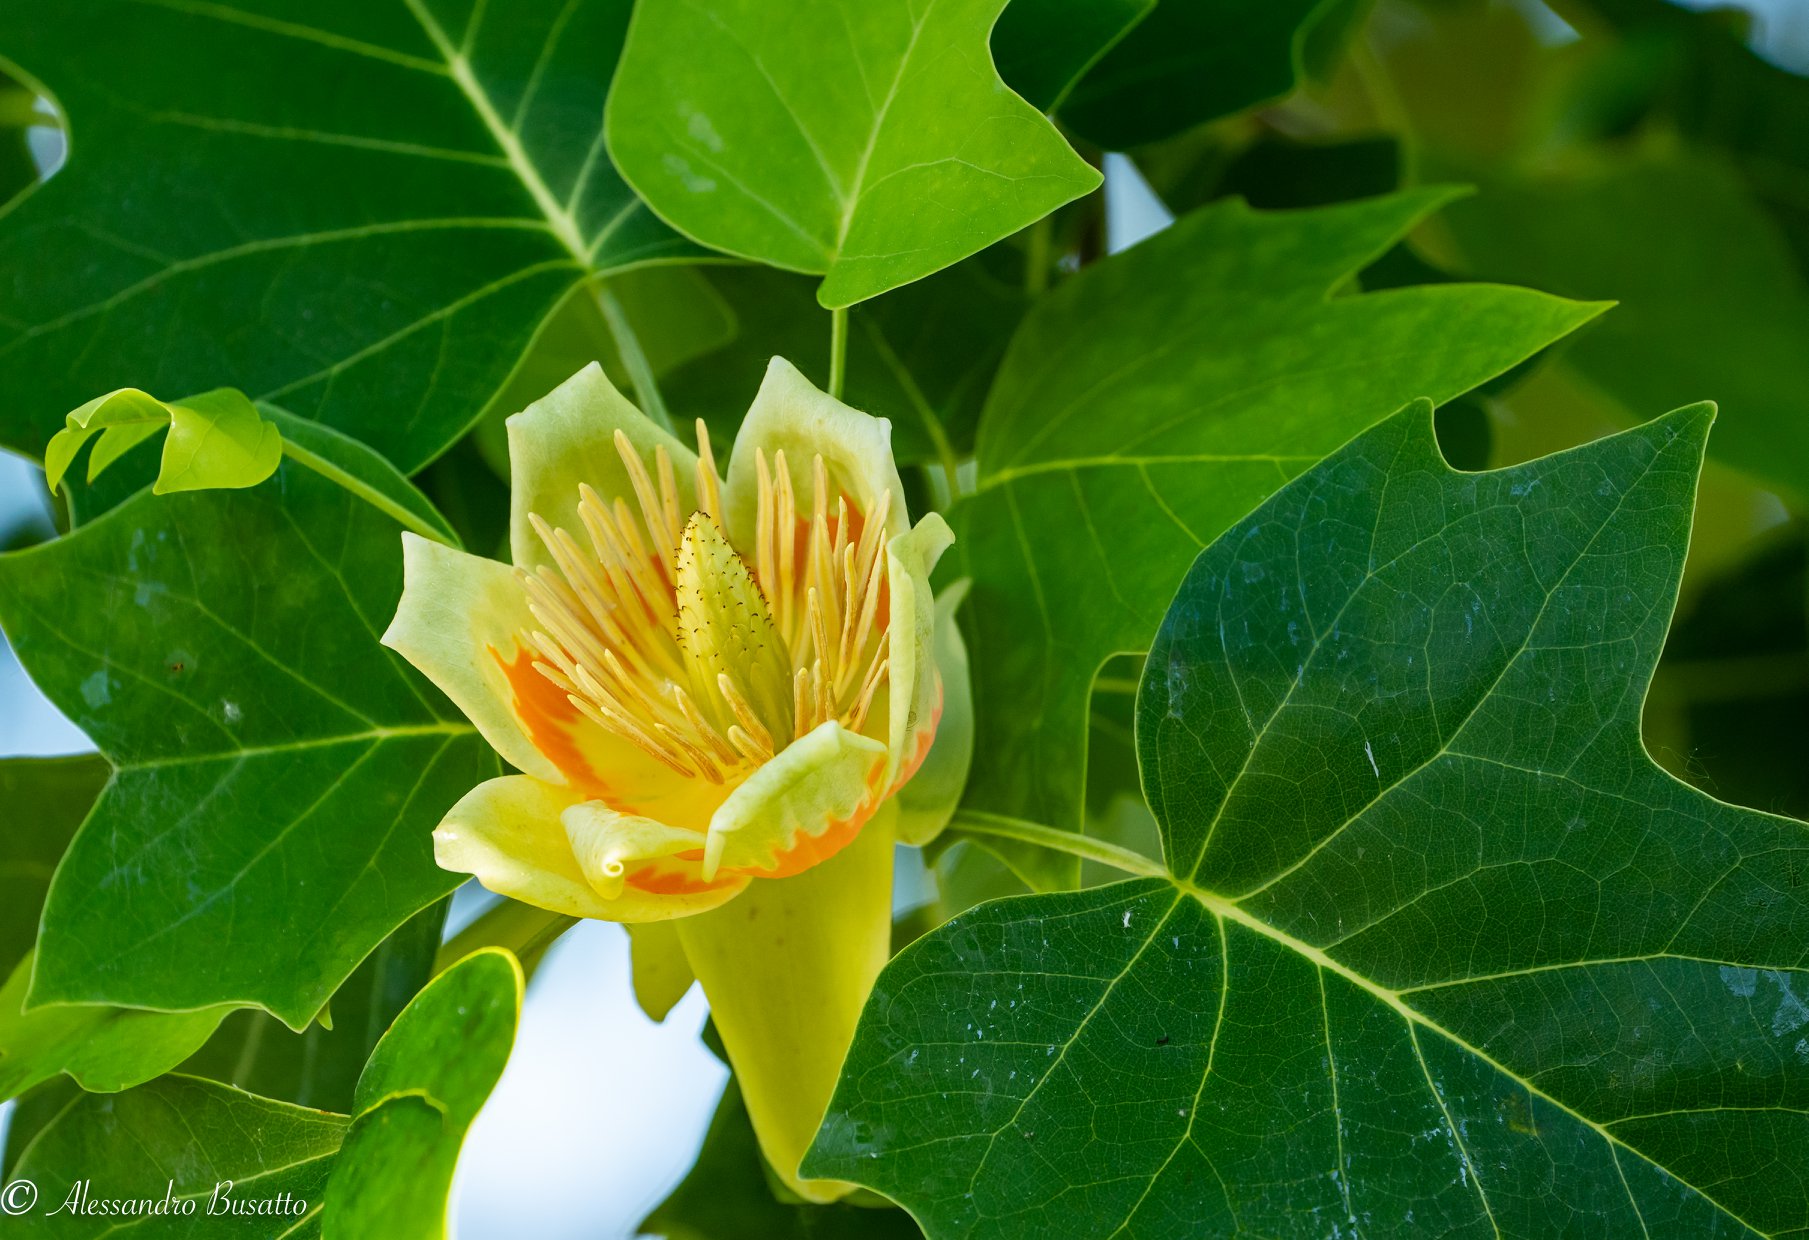 The flower of the tulip tree...